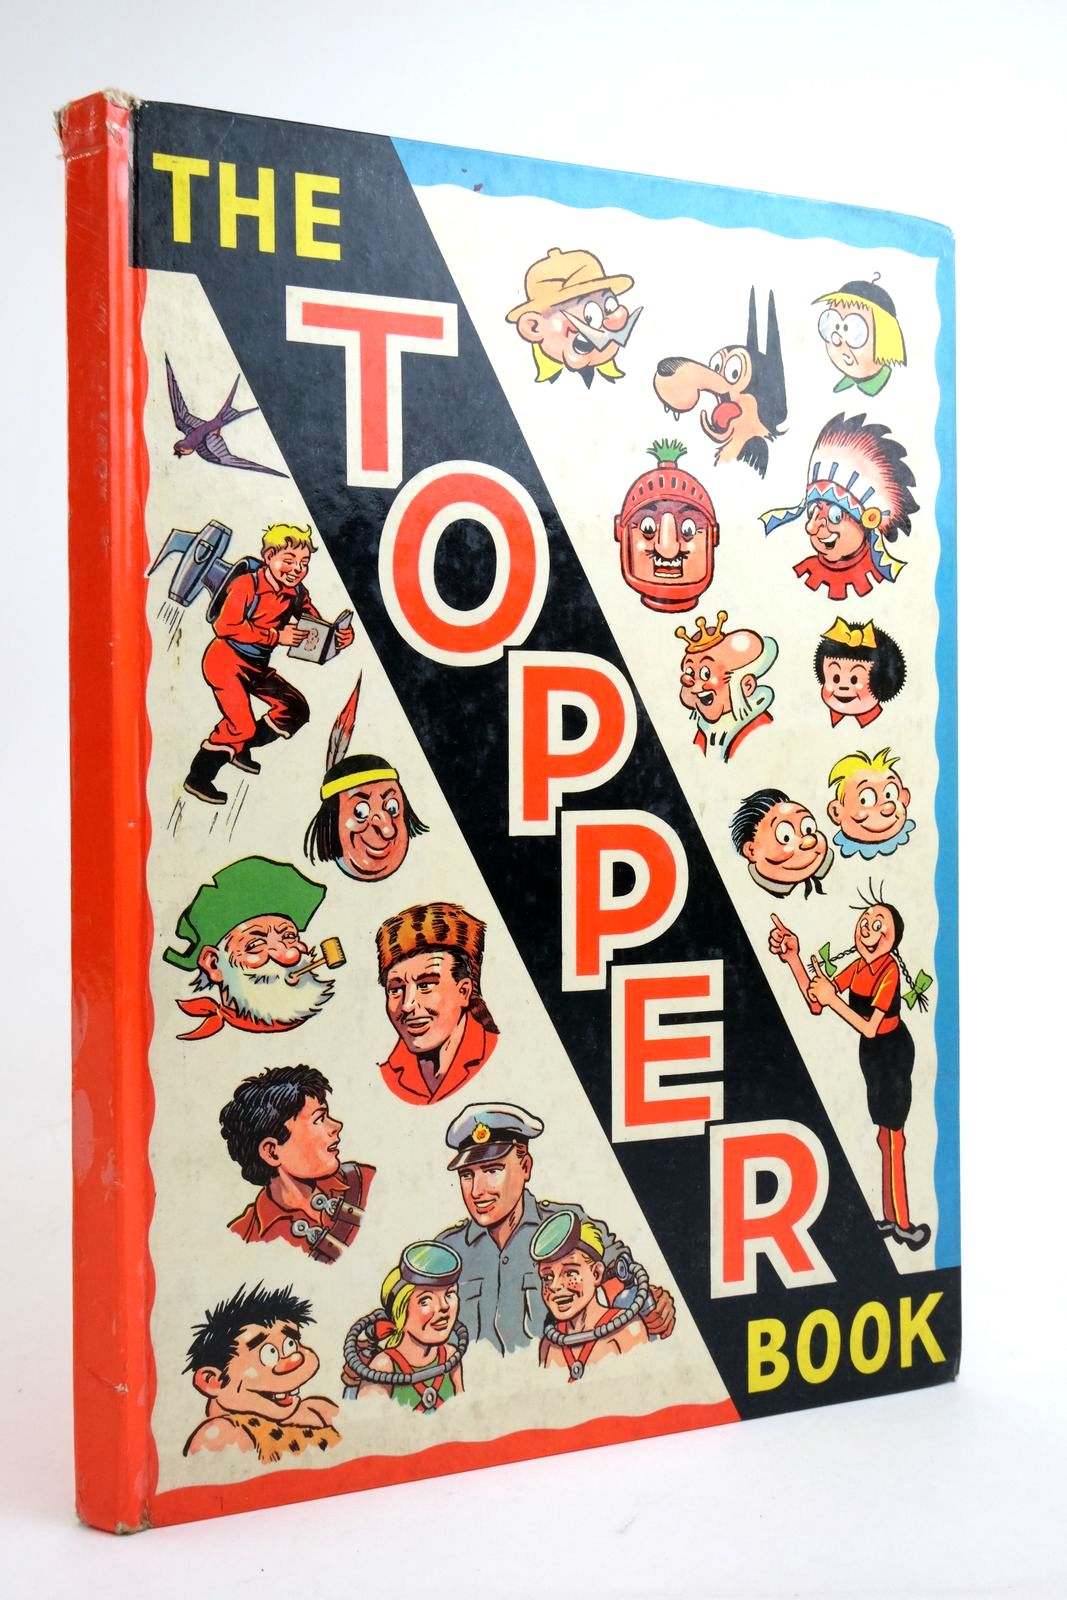 Photo of THE TOPPER BOOK 1960 published by D.C. Thomson &amp; Co Ltd., John Leng &amp; Co. Ltd. (STOCK CODE: 2136243)  for sale by Stella & Rose's Books